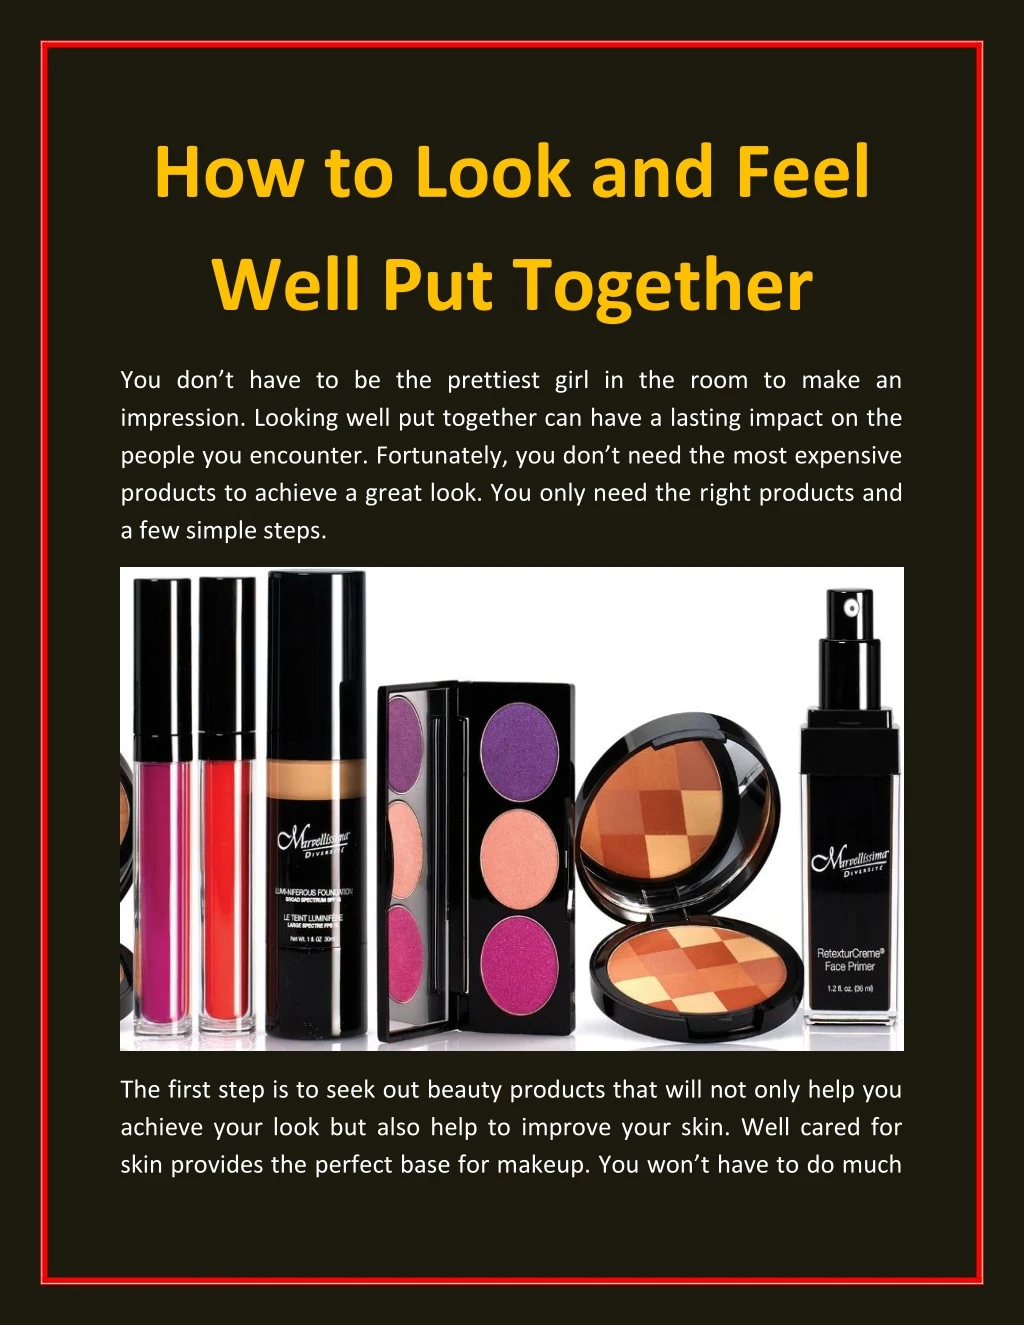 how to look and feel well put together